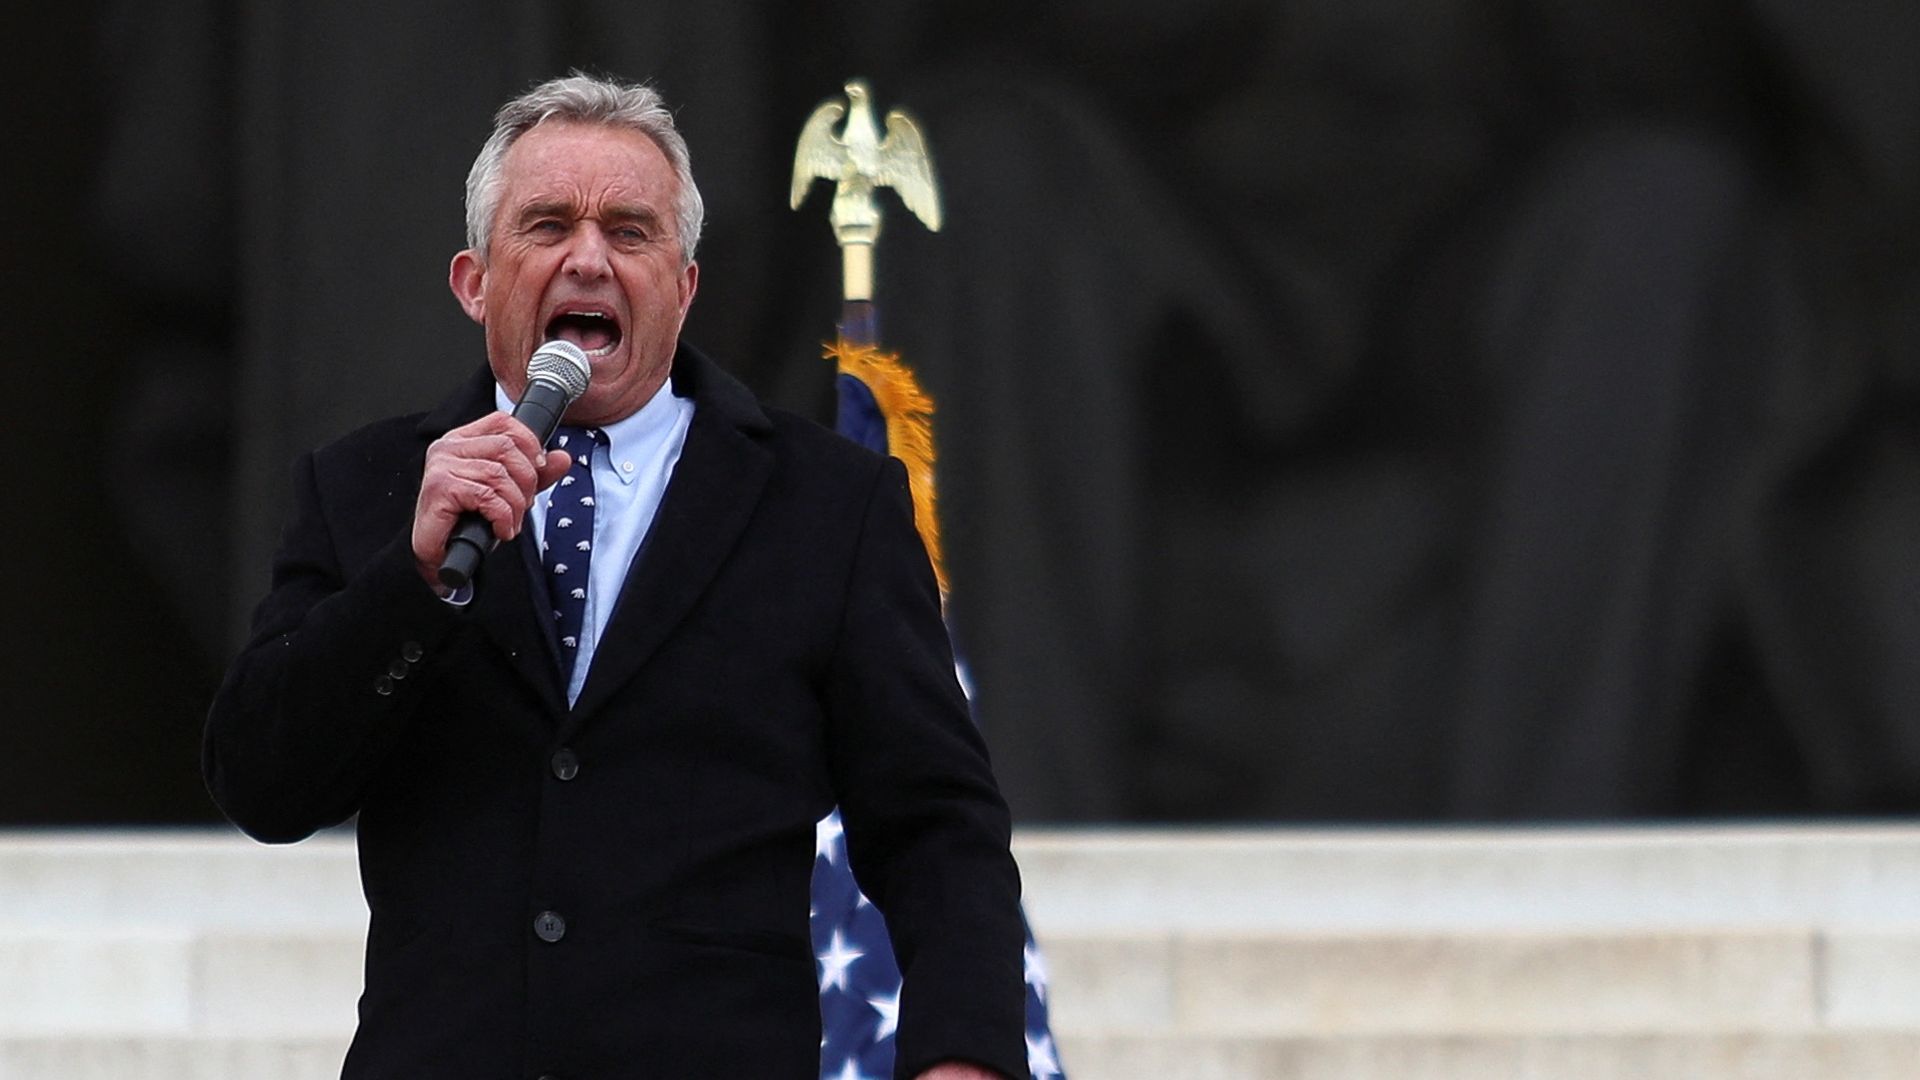 Presidential candidate RFK Jr. appears to pull more support from former President Trump than President Biden, according to a new poll.